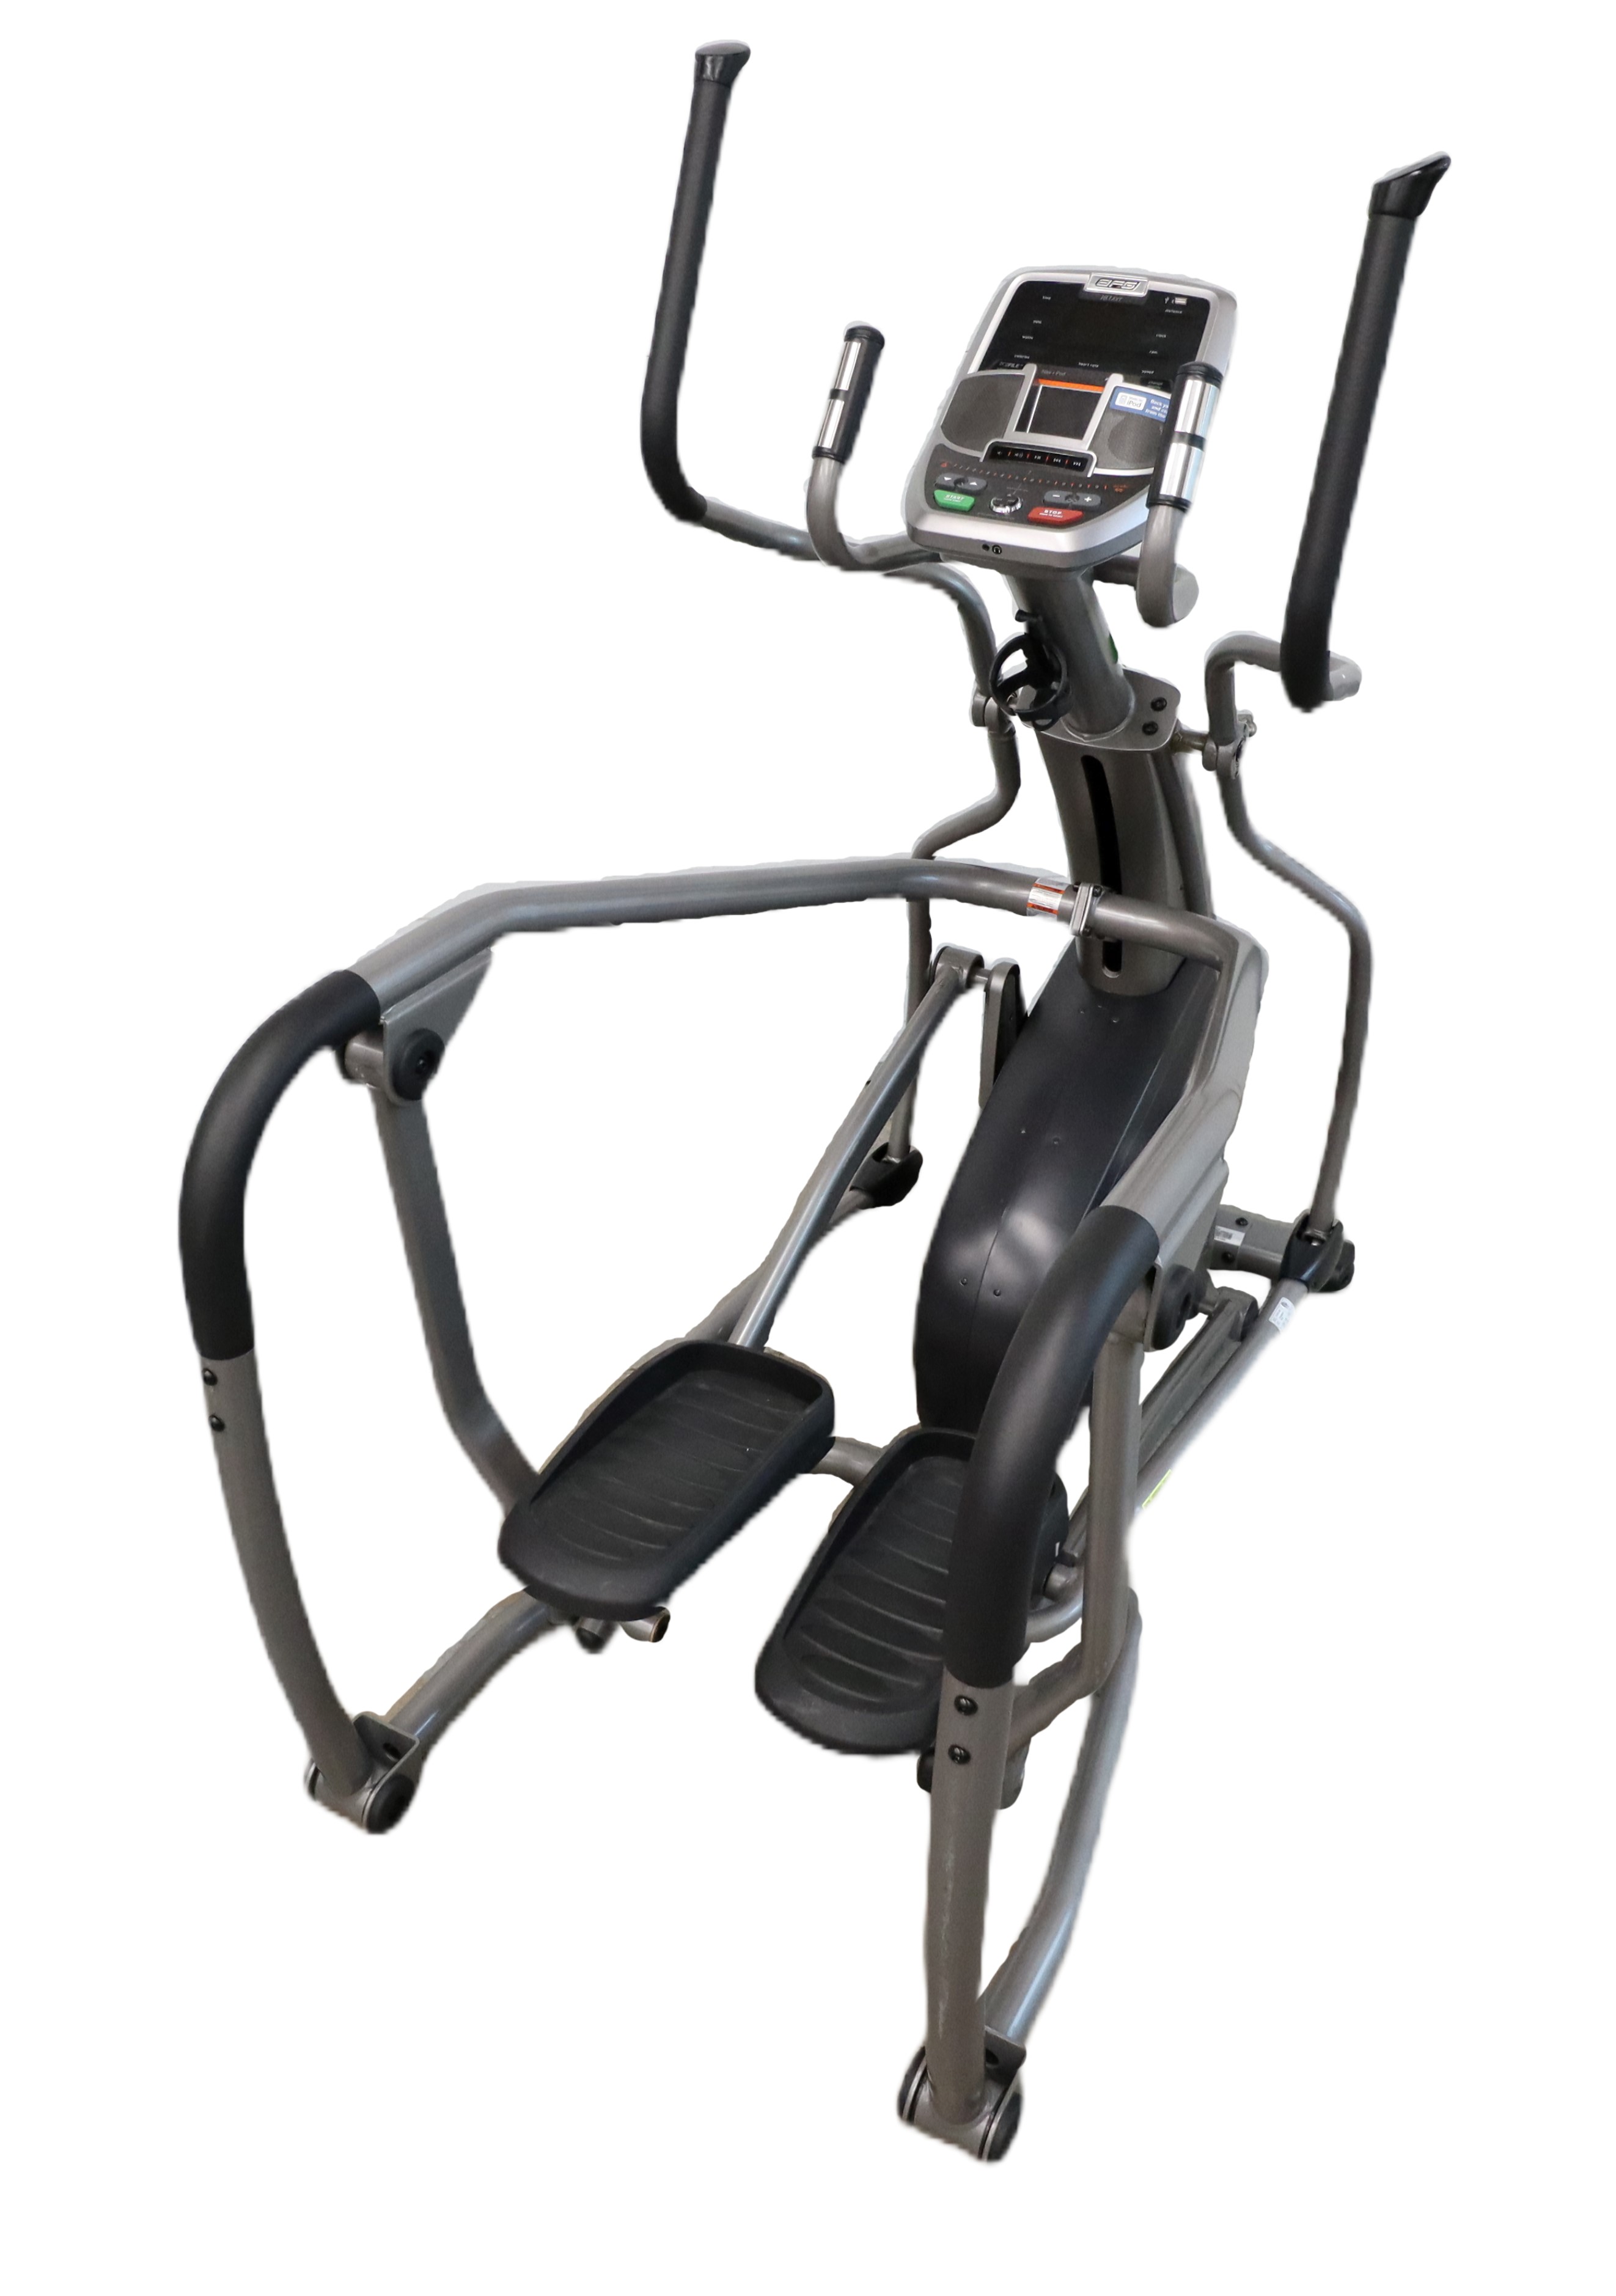 Used AFG Johnson Fitness 18.1AXT Ascent Trainer Elliptical